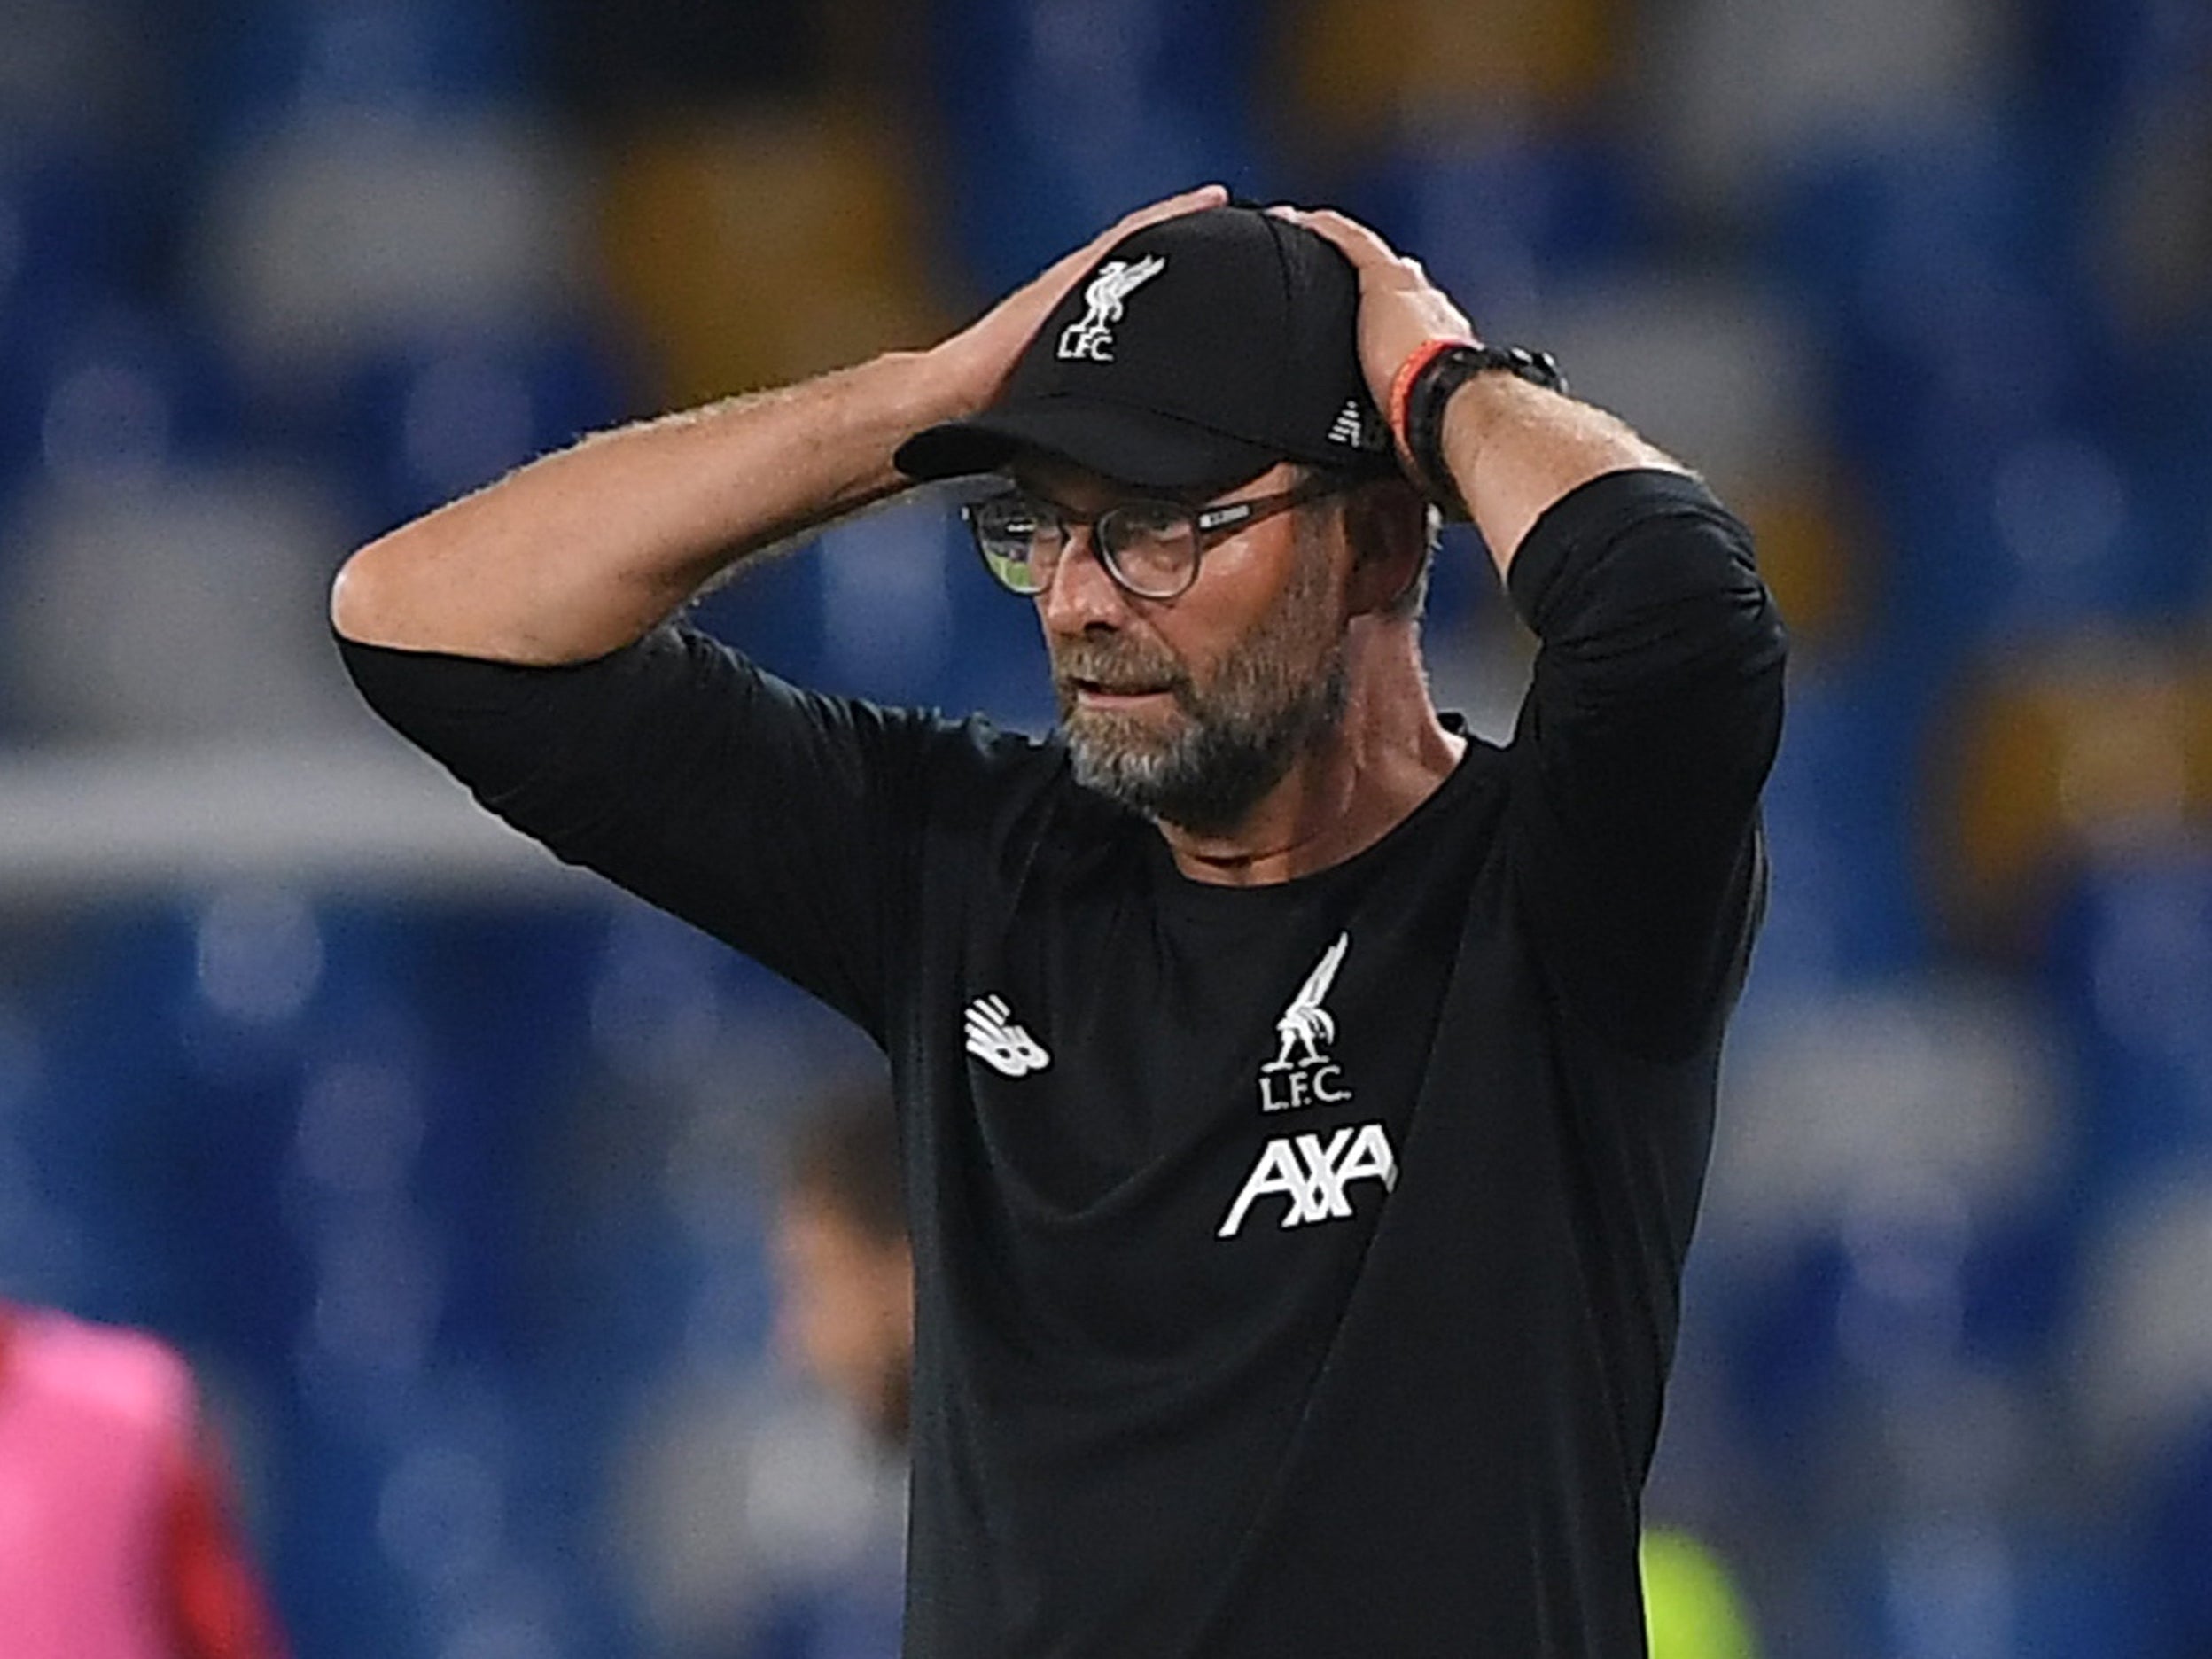 Liverpool lost in Naples twice during the Klopp era